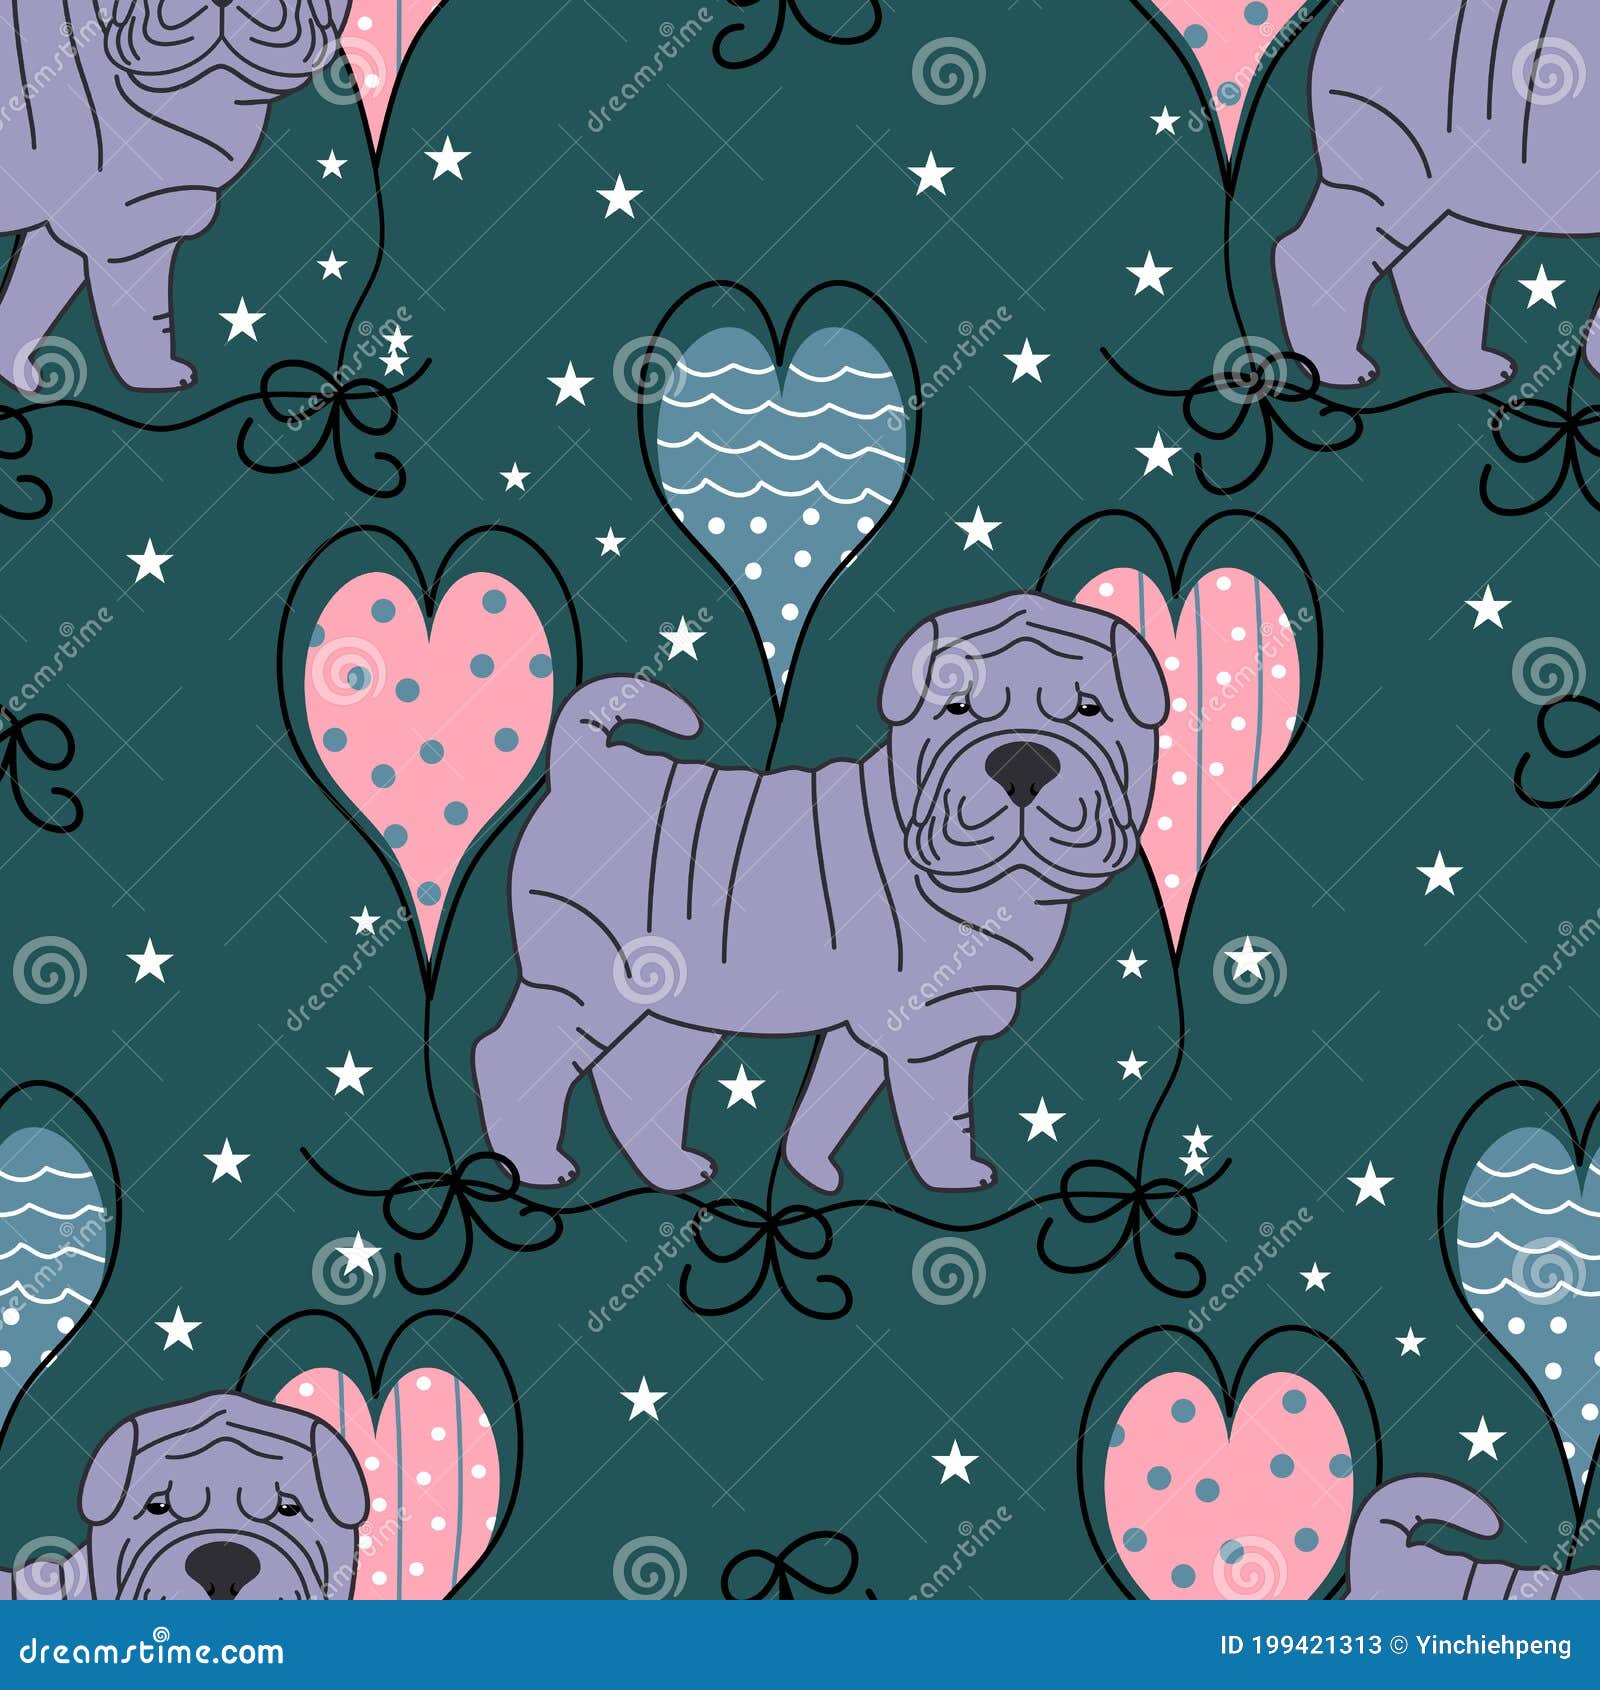 Blue Shar Pei Puppies Seamless Pattern Background With Heart Balloons Cartoon Dog Puppy Background Hand Drawn Childish Vector Stock Illustration Illustration Of Looking Character 199421313